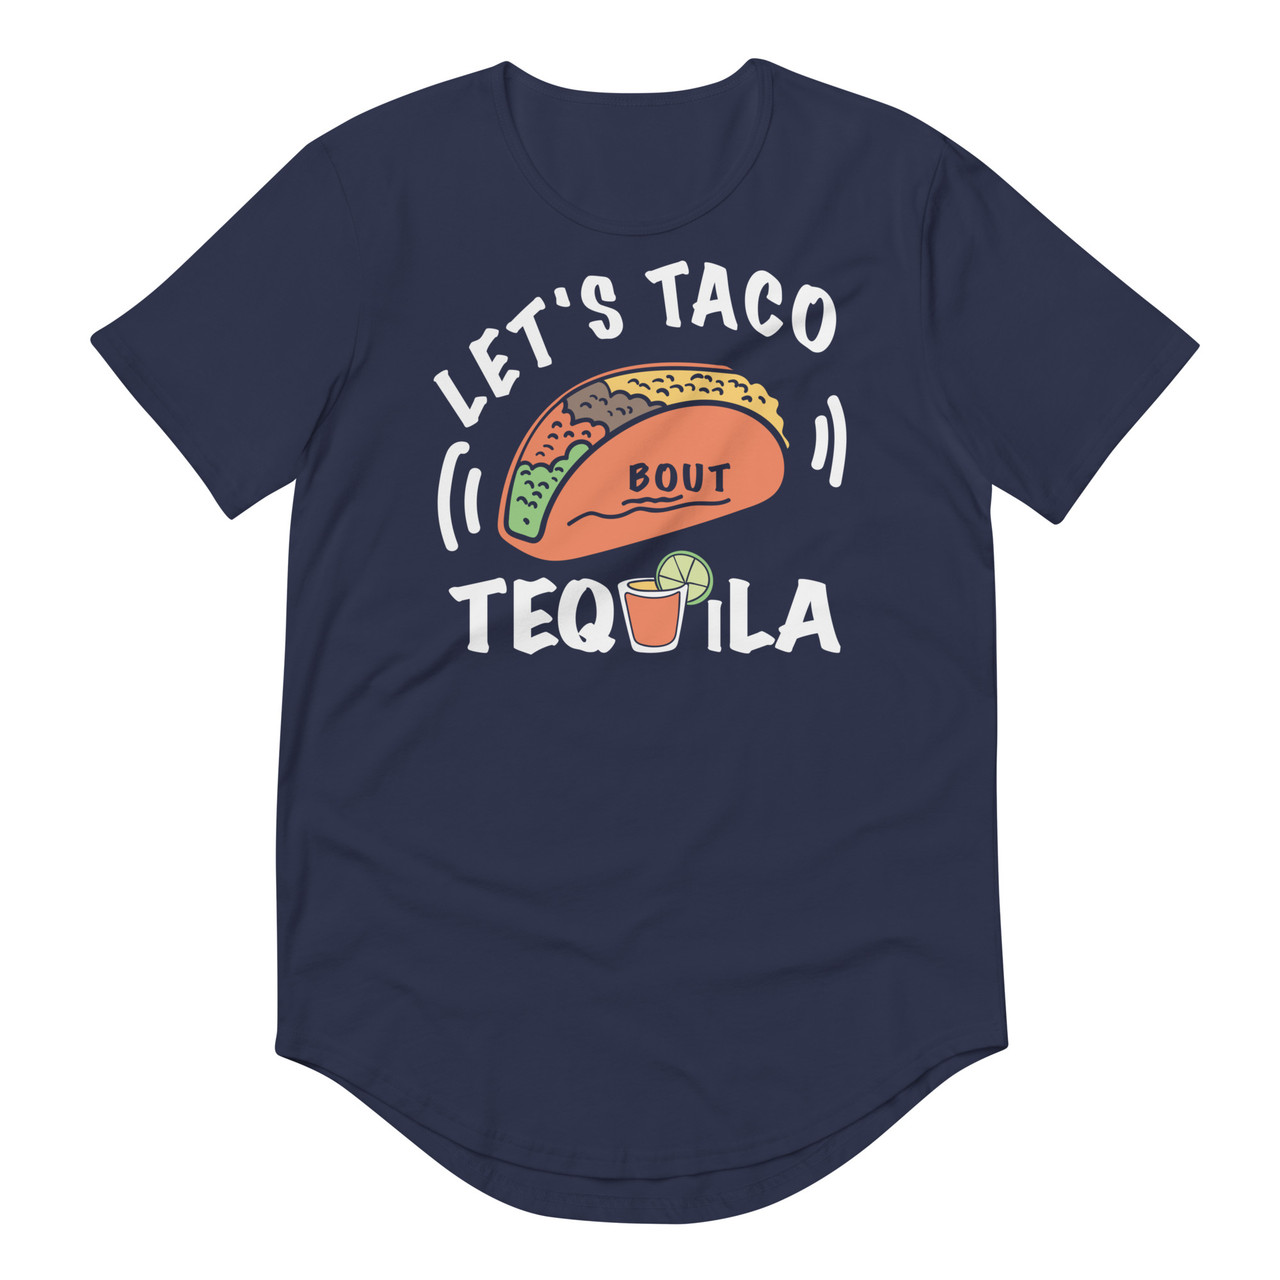 Let's Taco bout Tequila Curved Hem Tee - Bella + Canvas 3003 